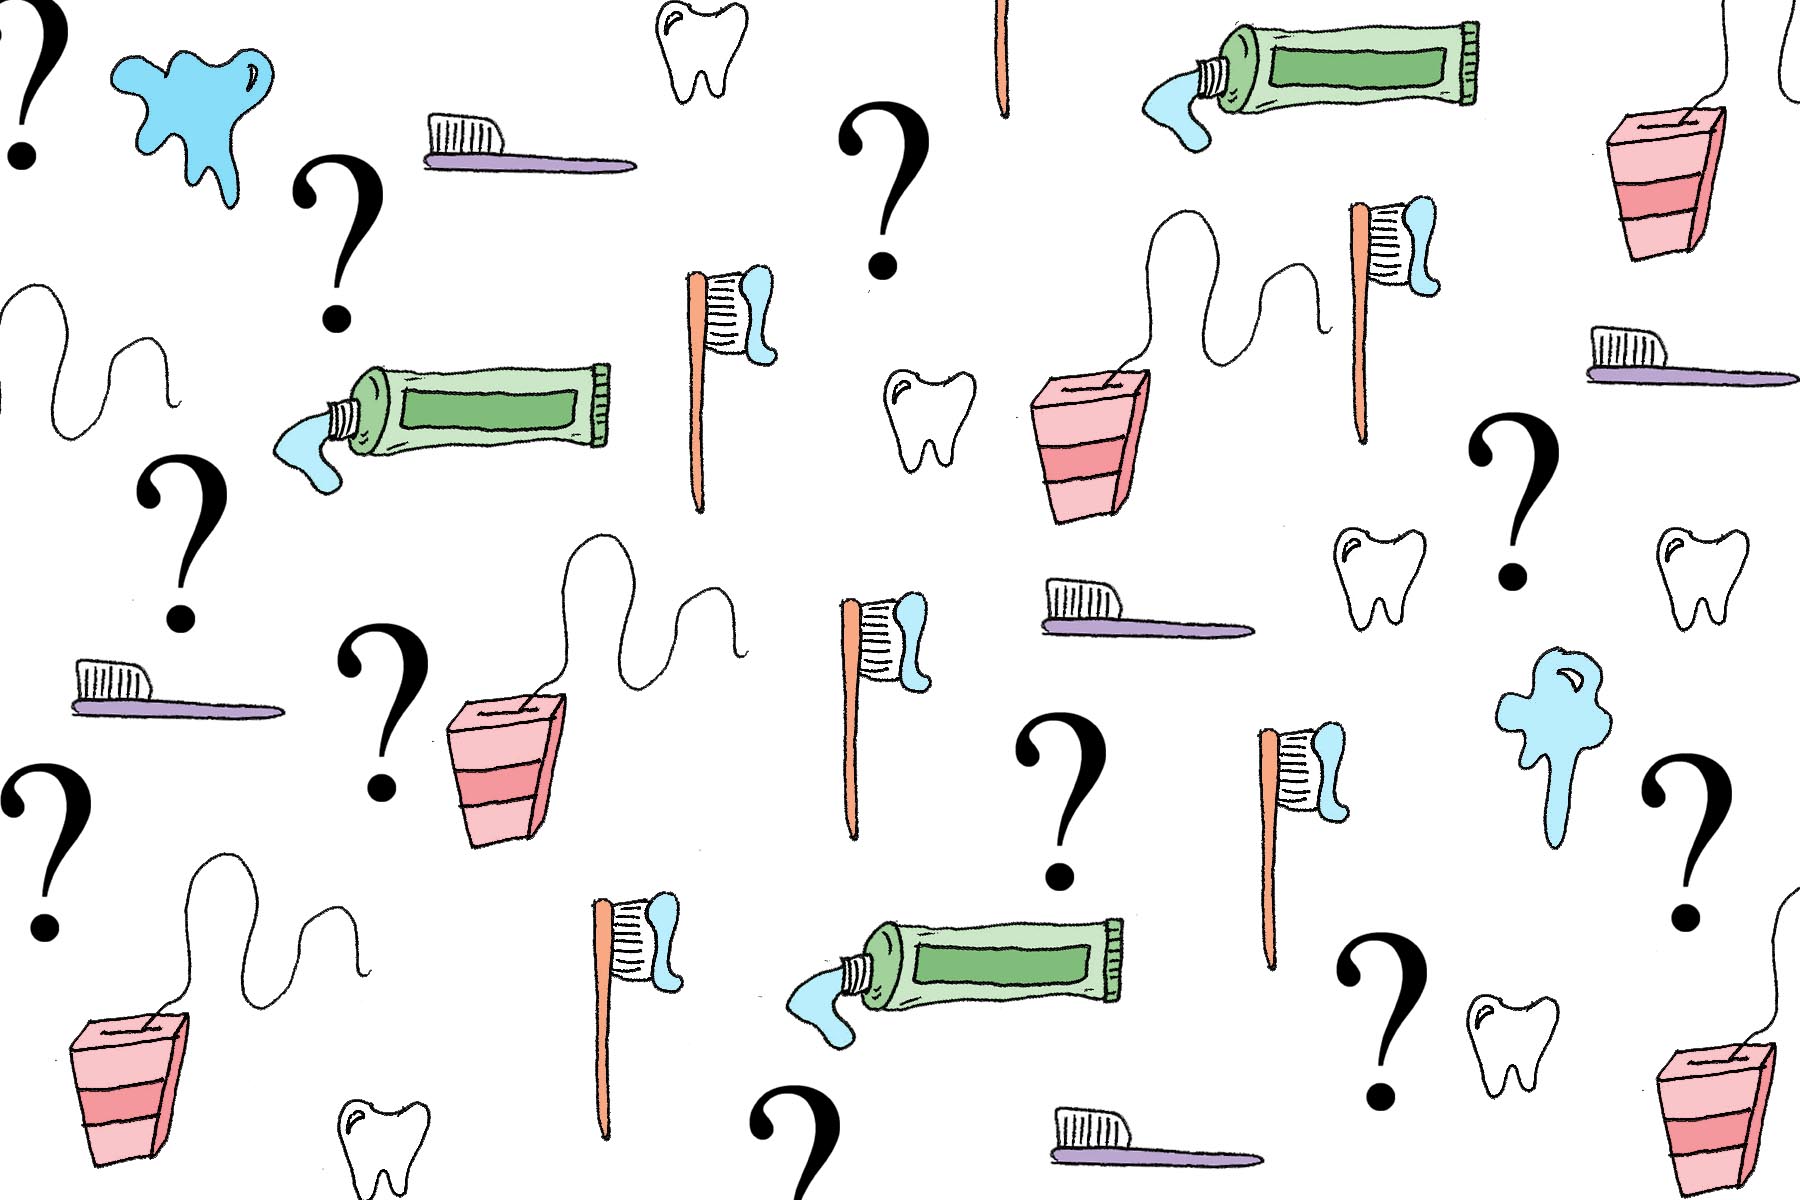 Is oral hygiene just brushing and flossing?